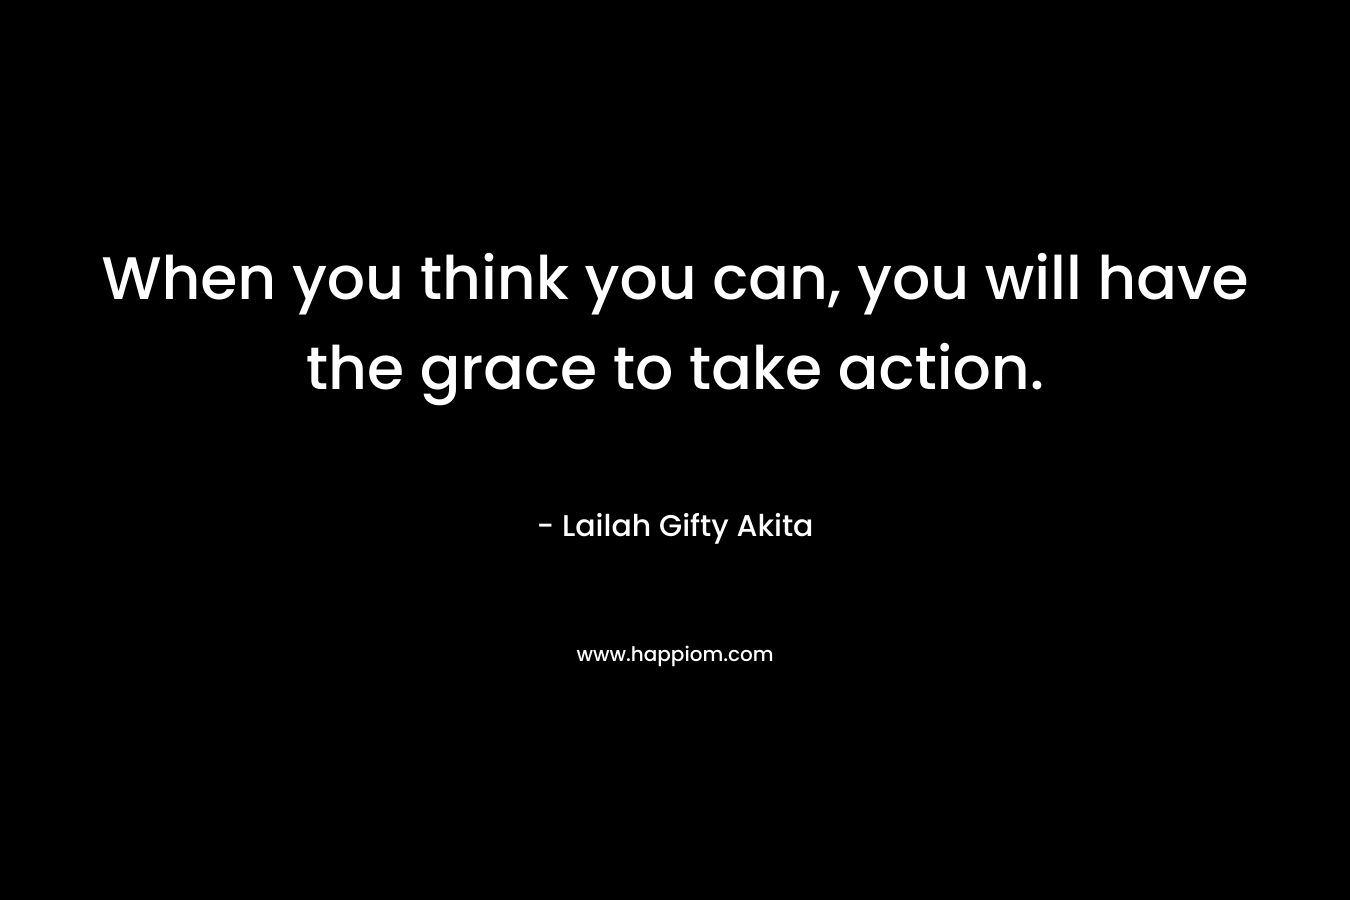 When you think you can, you will have the grace to take action.